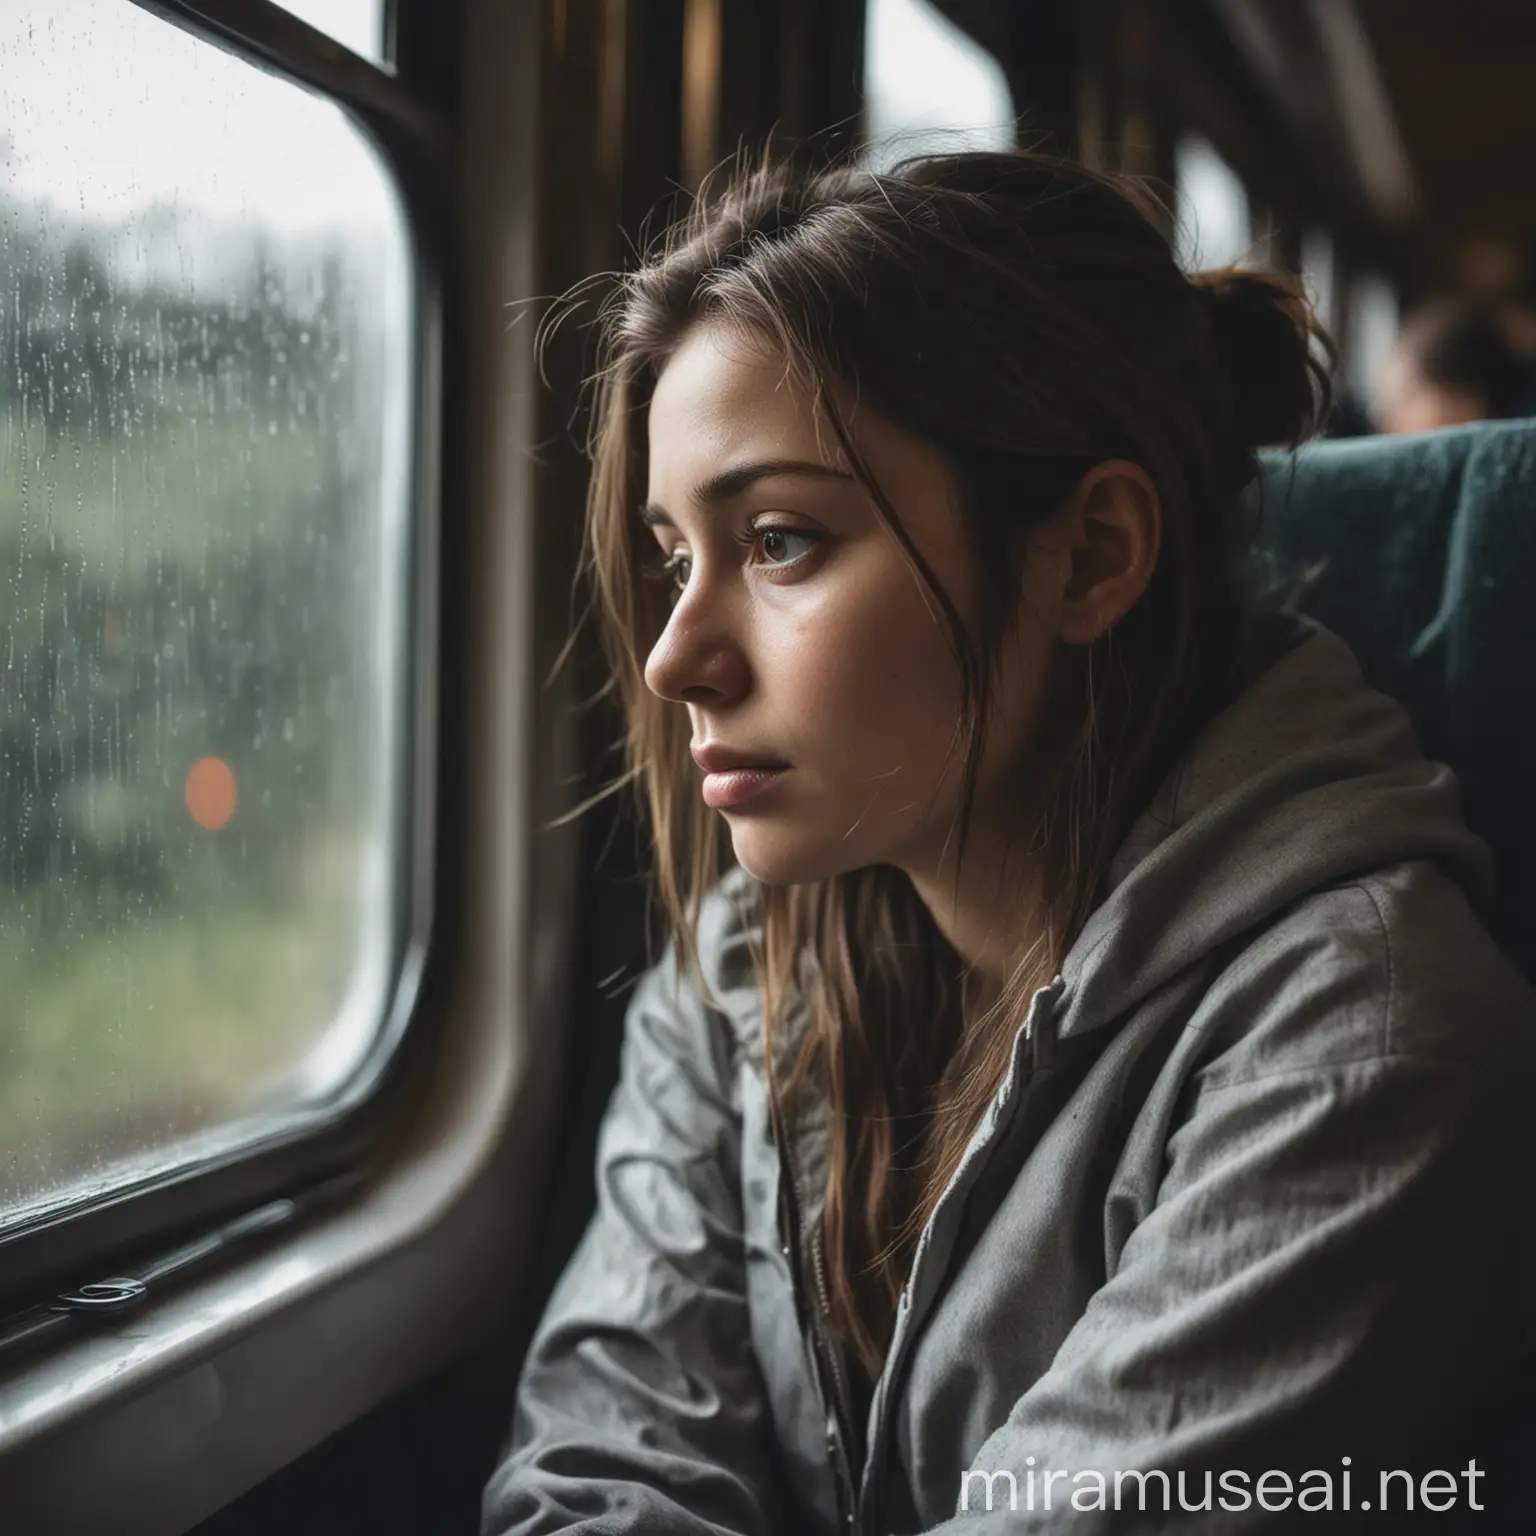  a person traveling on a train, seated by the window.
The person should appear dull and sad, with a gloomy expression and body language. The weather outside the window could be cloudy or rainy to reflect the mood.
